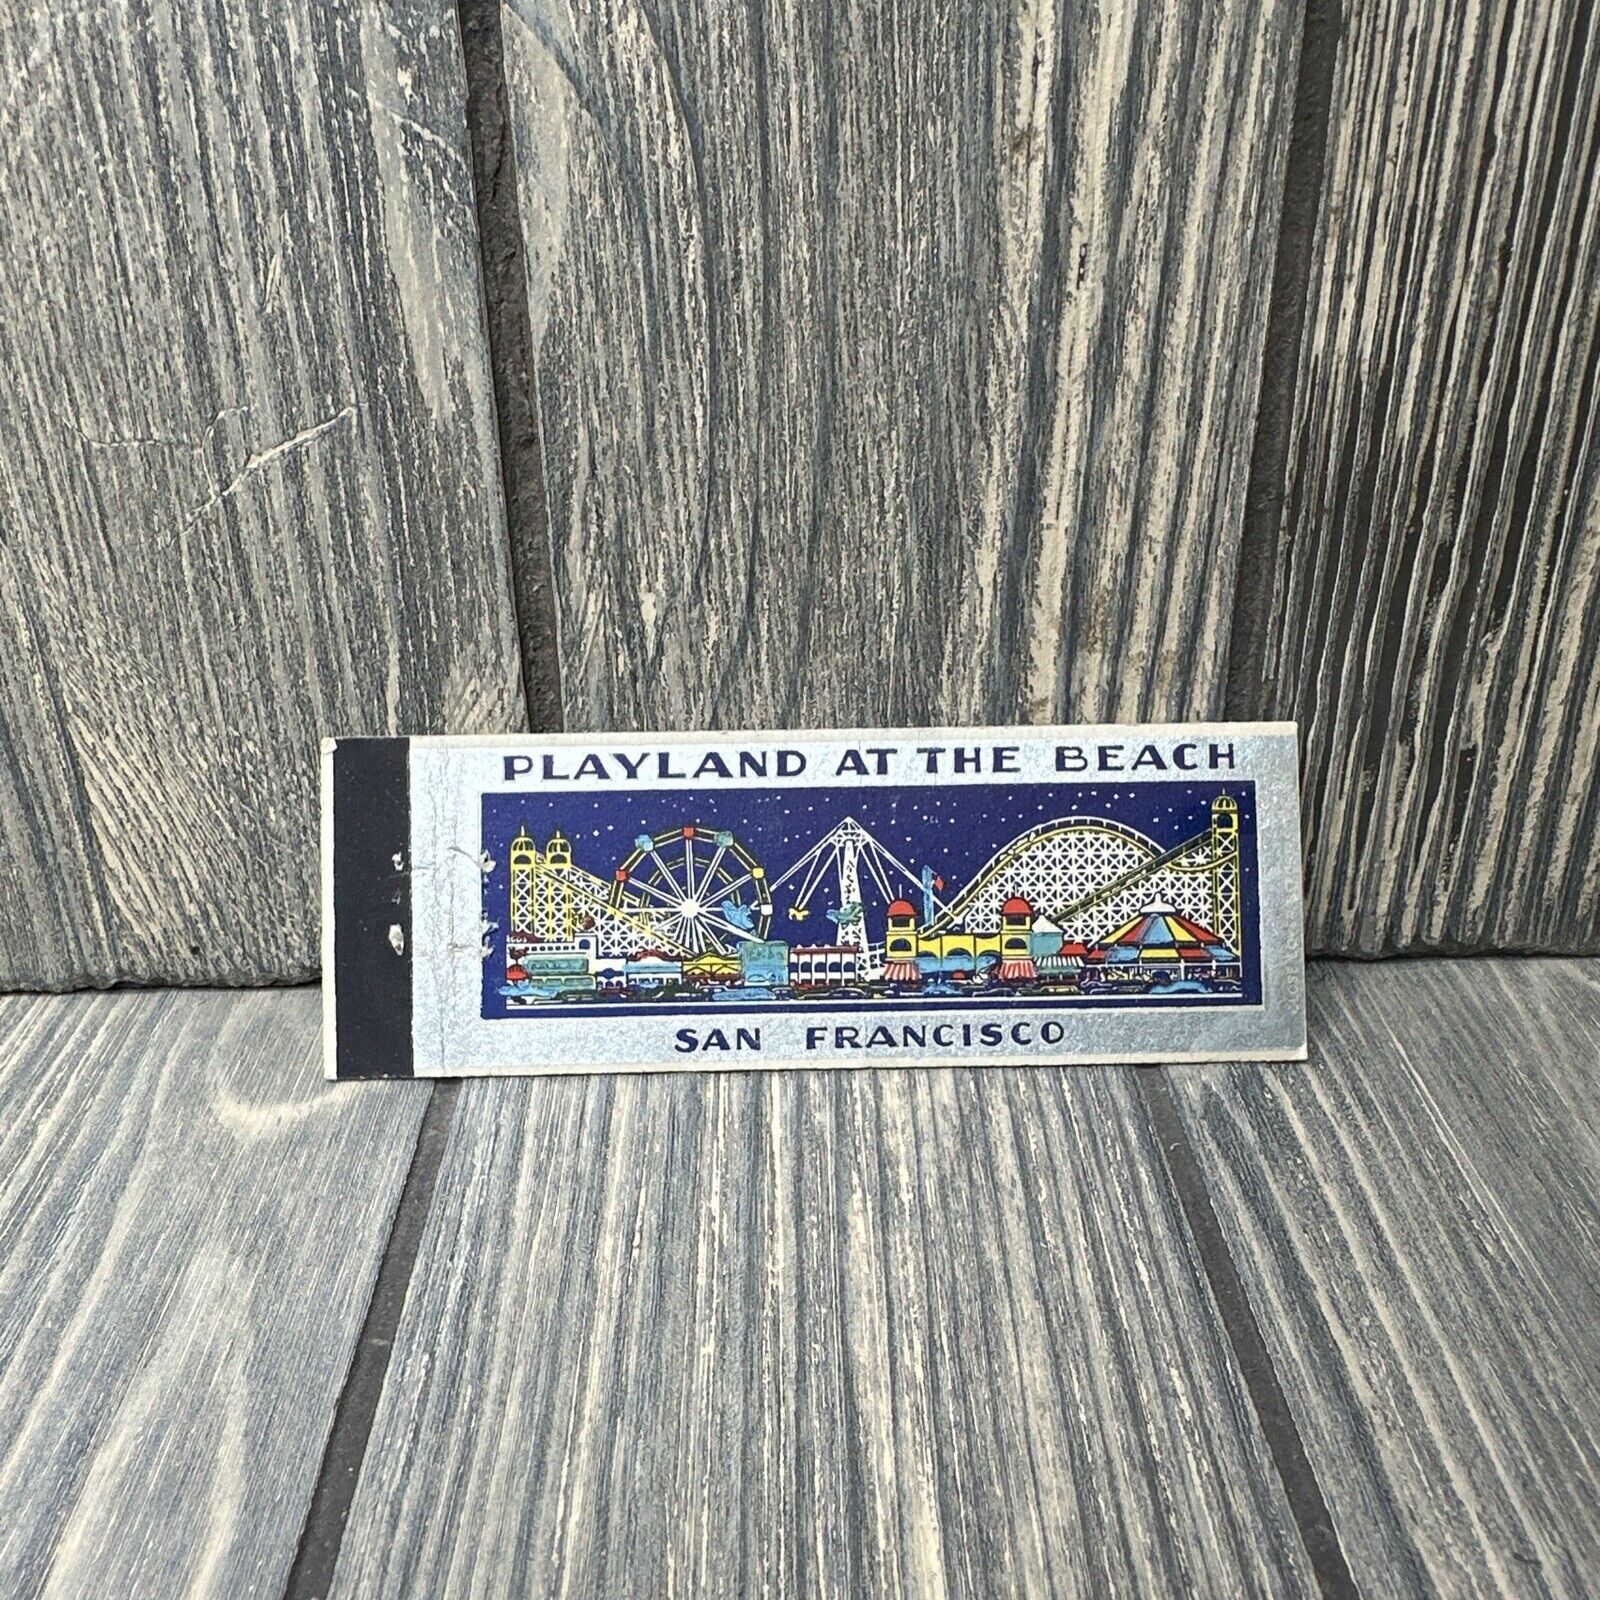 Vtg Playland at the Beach San Francisco Matchbook Cover Advertisement